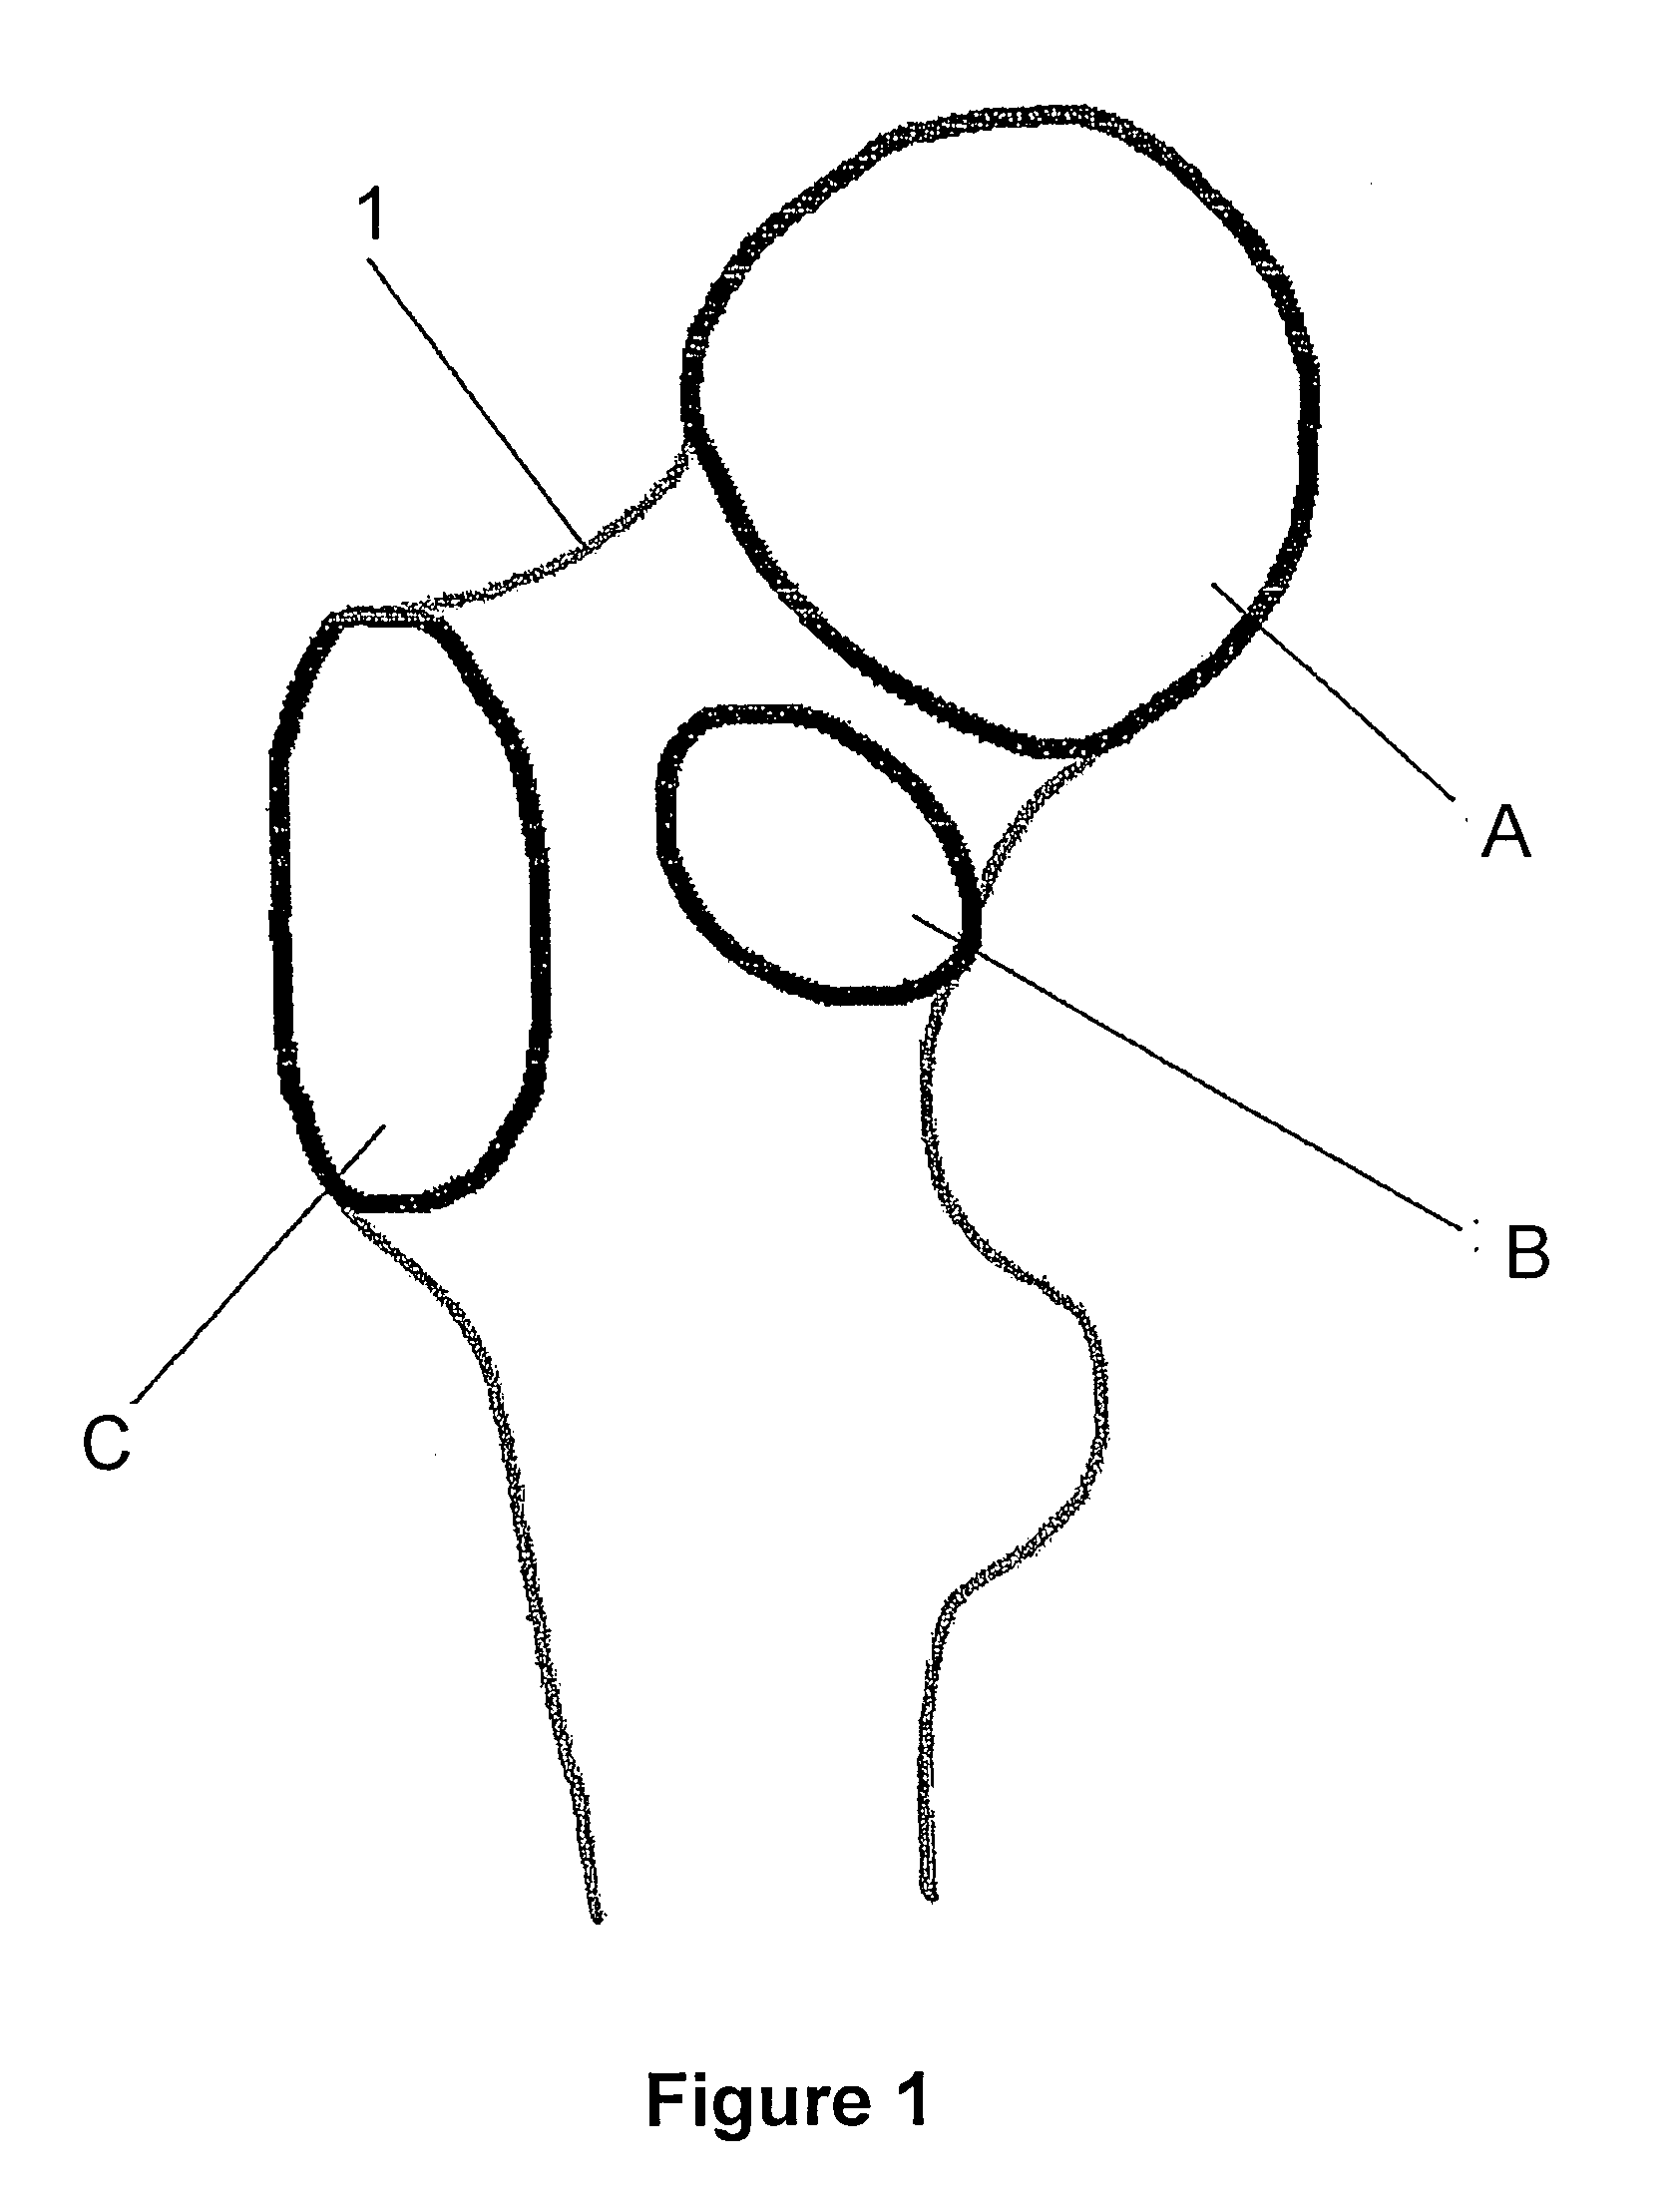 Method for determining an arrangement of measurement points on an anatomical structure